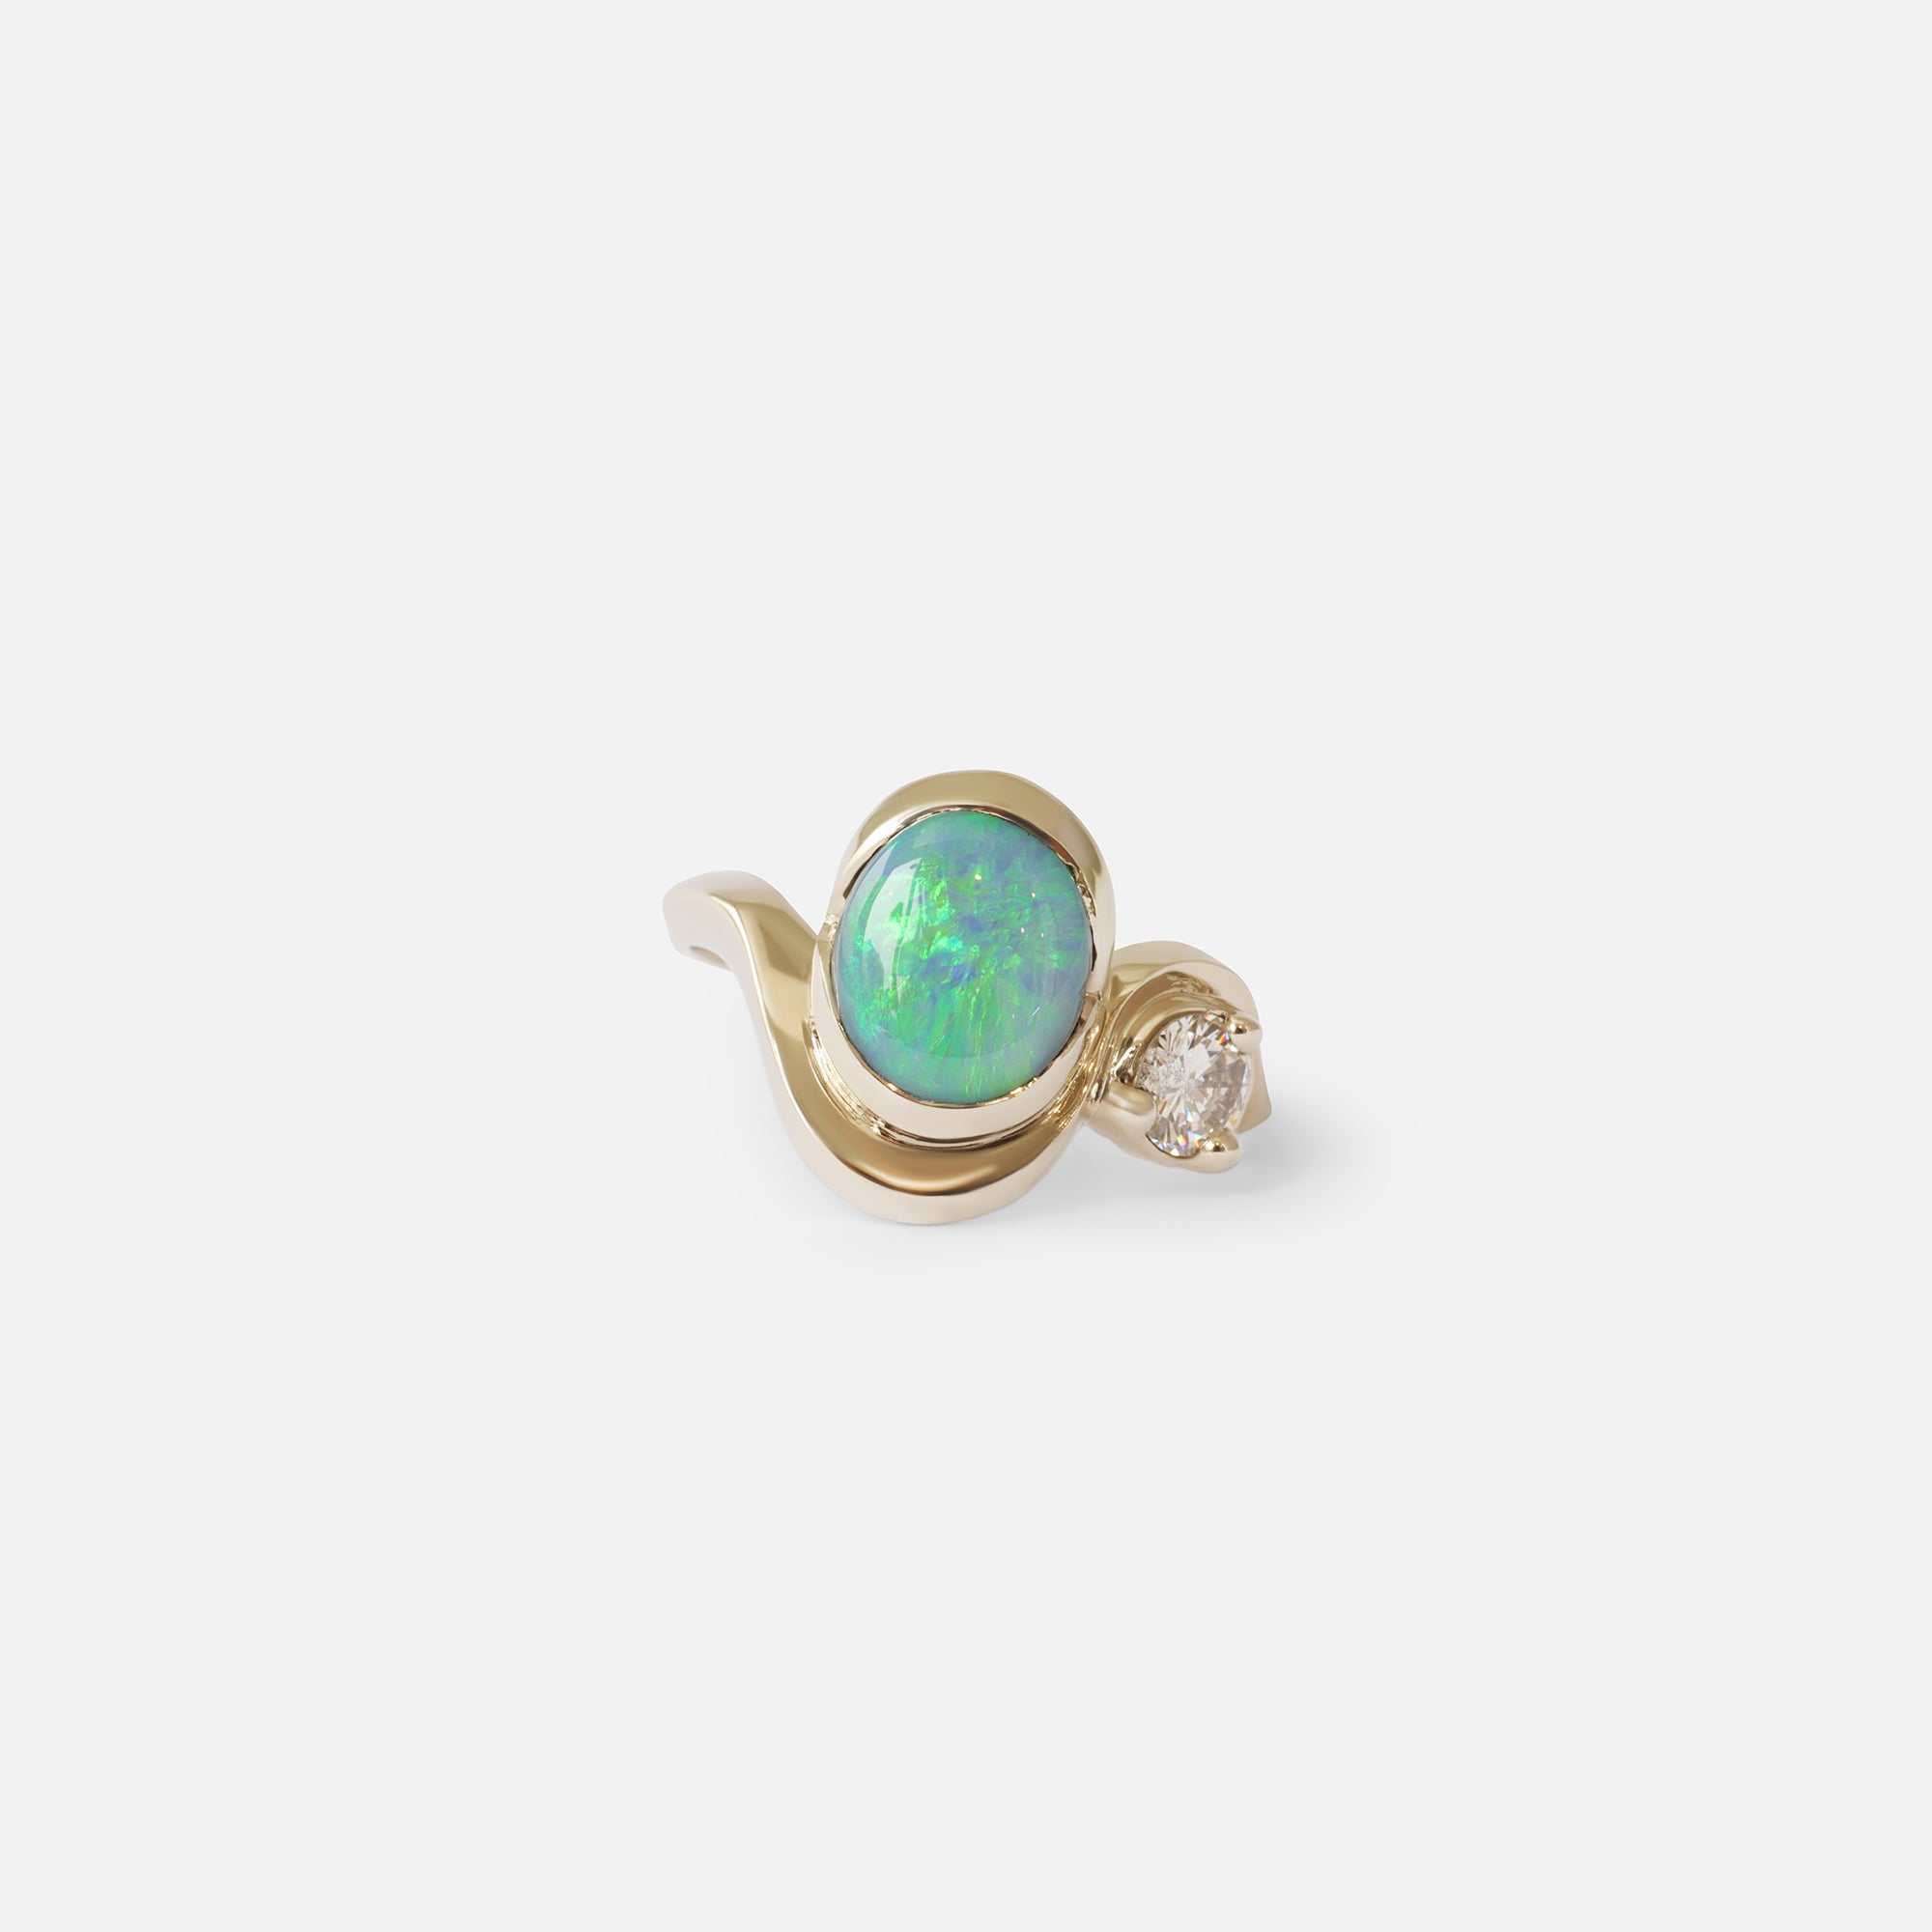 Opal Curve Ring By Kestrel Dillon in rings Category